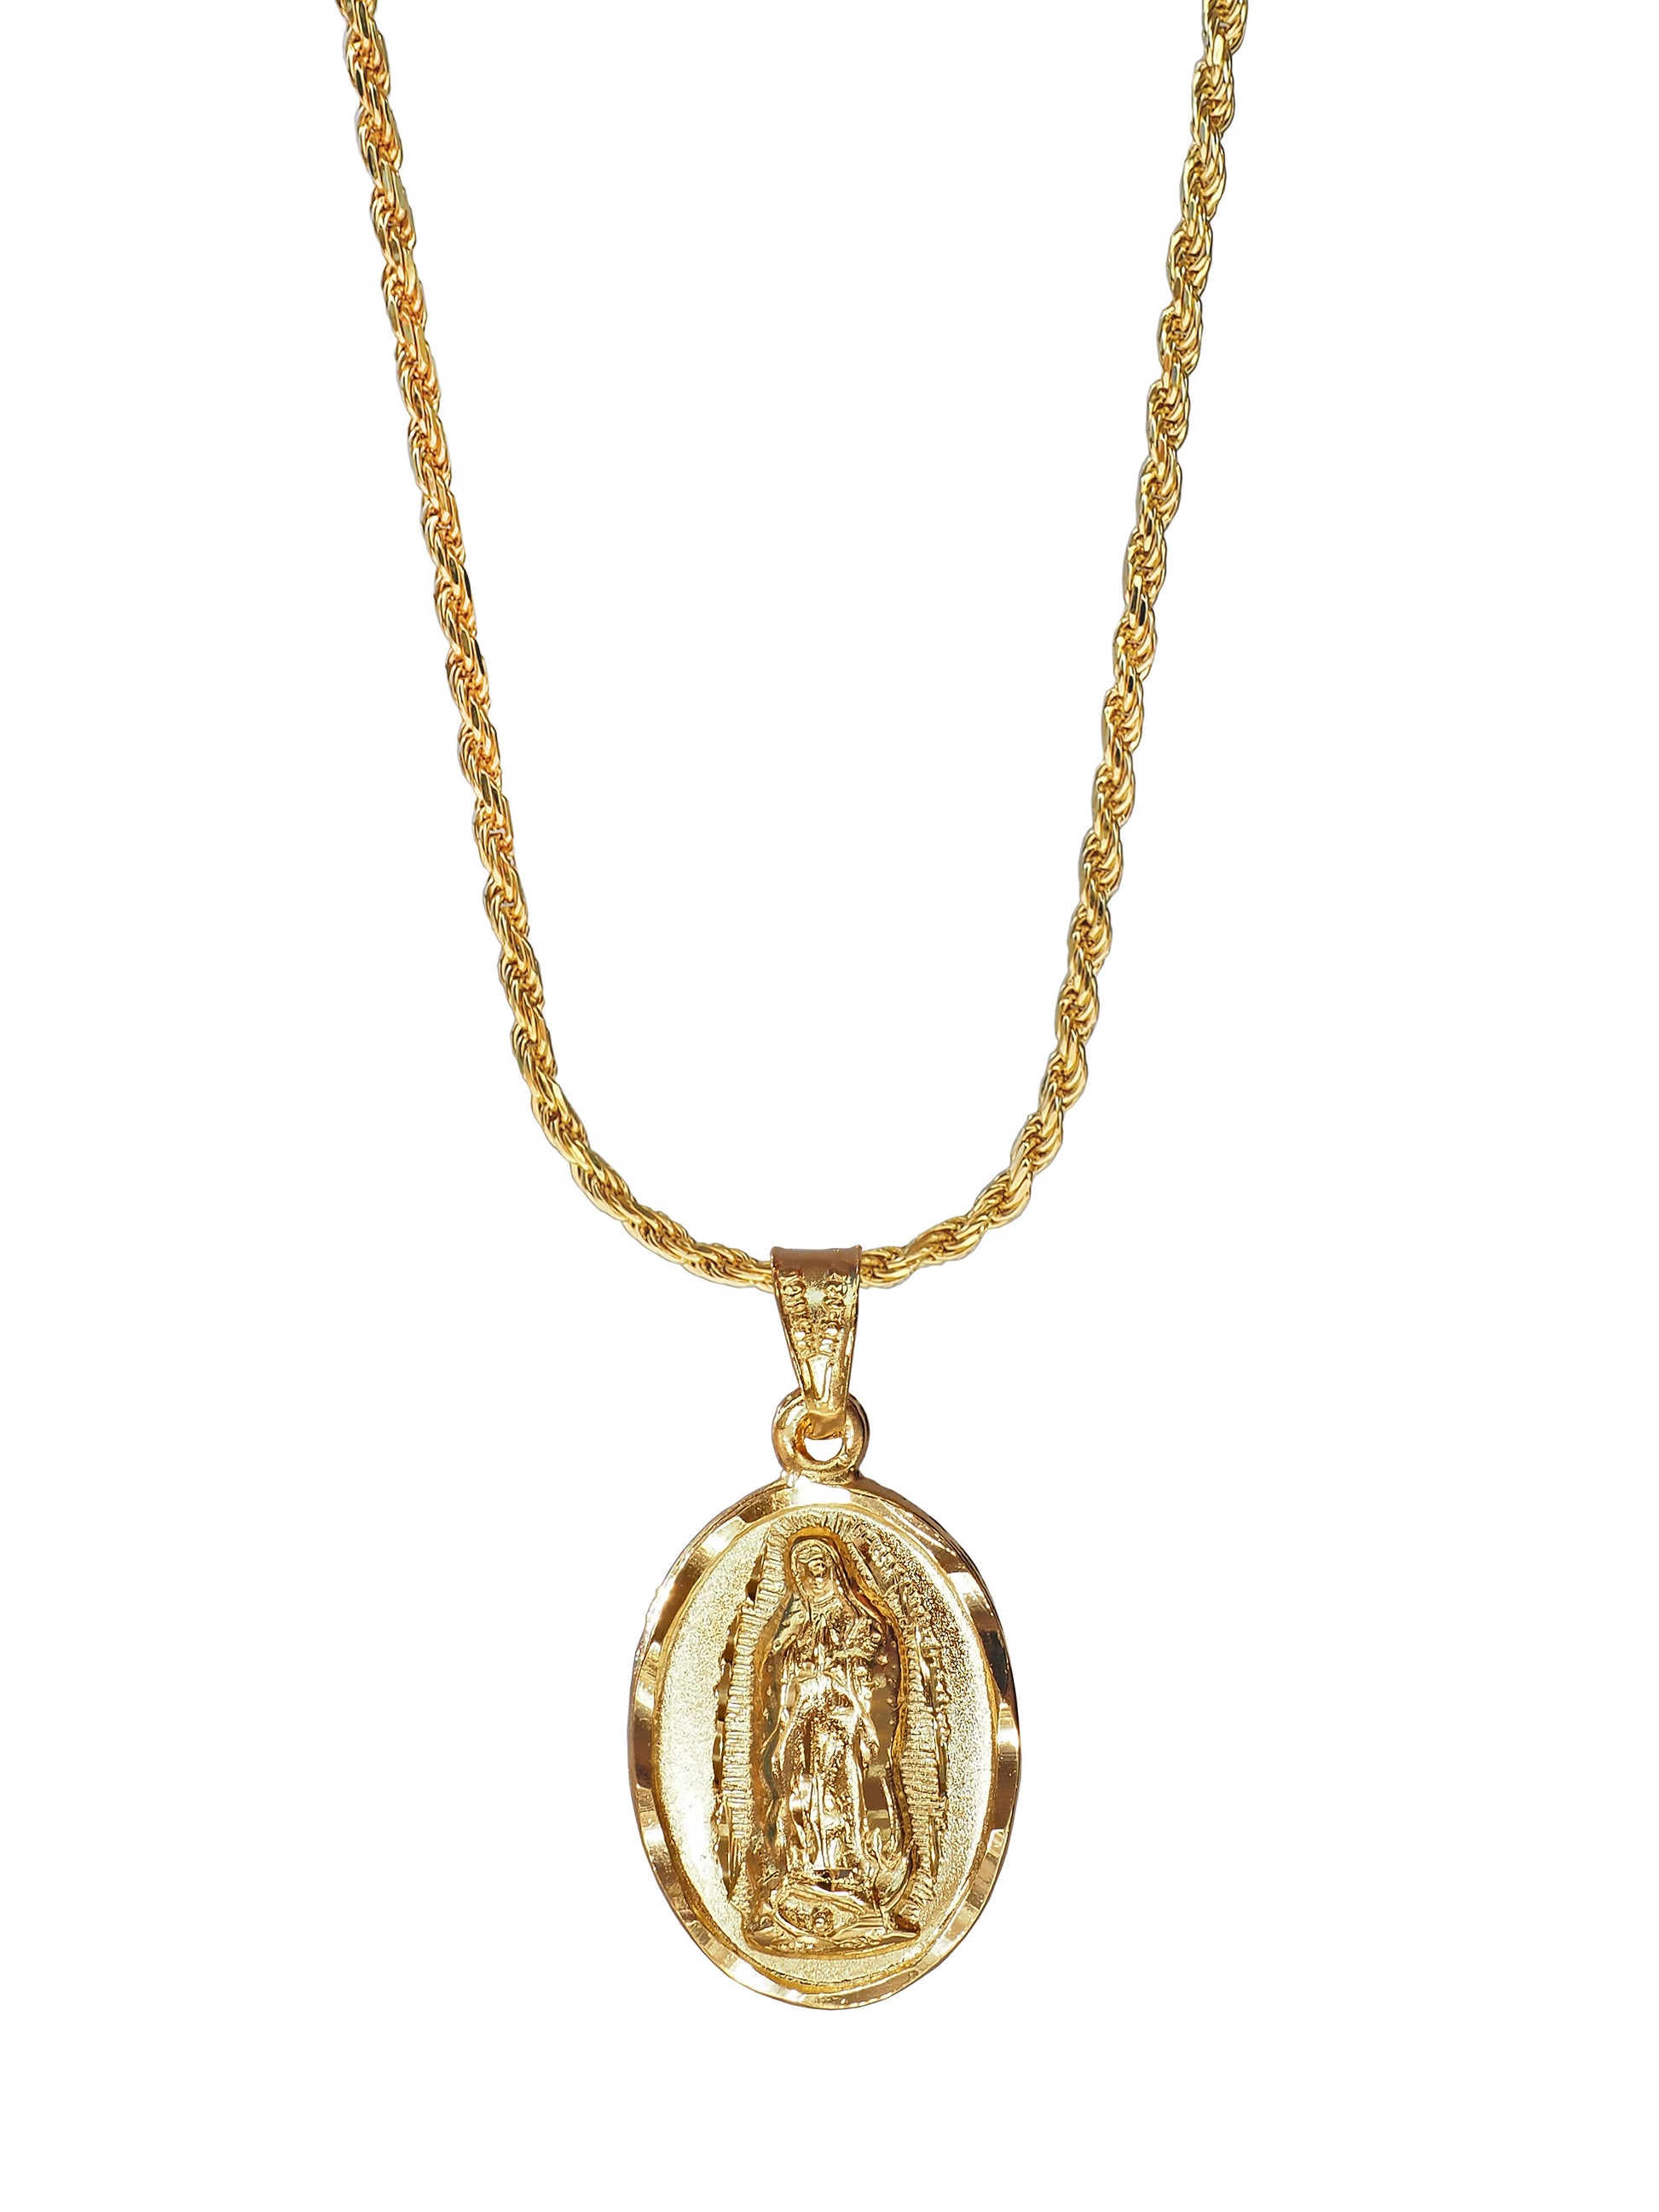 Delicate Guadalupe Necklace, gold plated Silver, gender Neutral. From Mexico